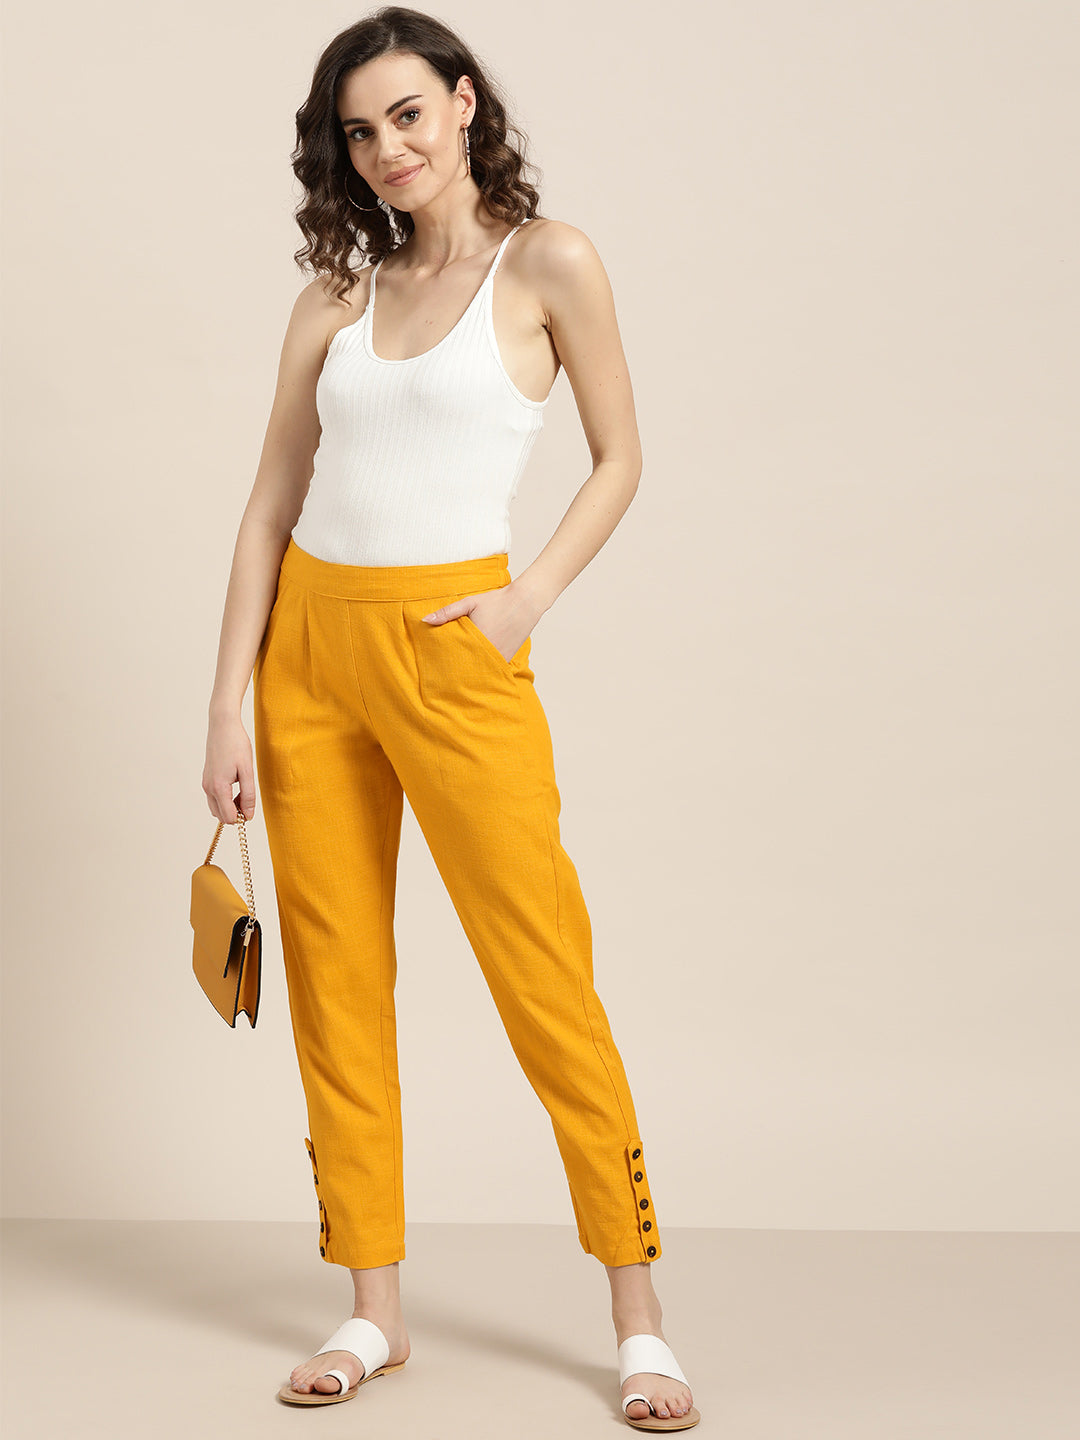 Stylish womens Trousers & Pants / Cigarette Pent for women, MUSTARD YELLOW  Ladies Pant